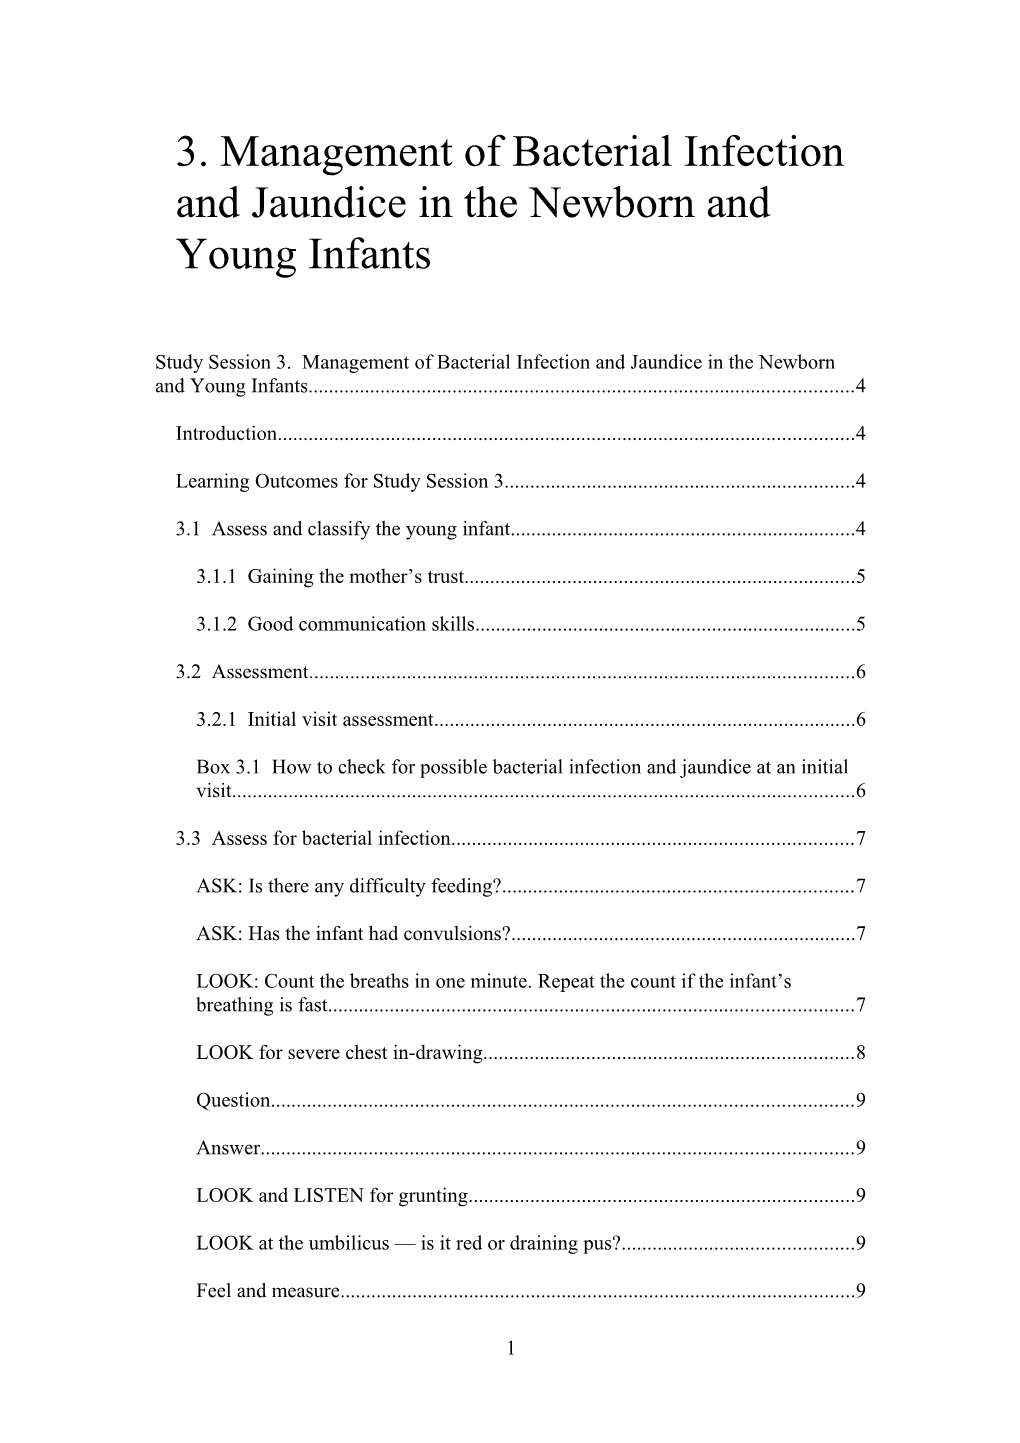 3. Management of Bacterial Infection and Jaundice in the Newborn and Young Infants